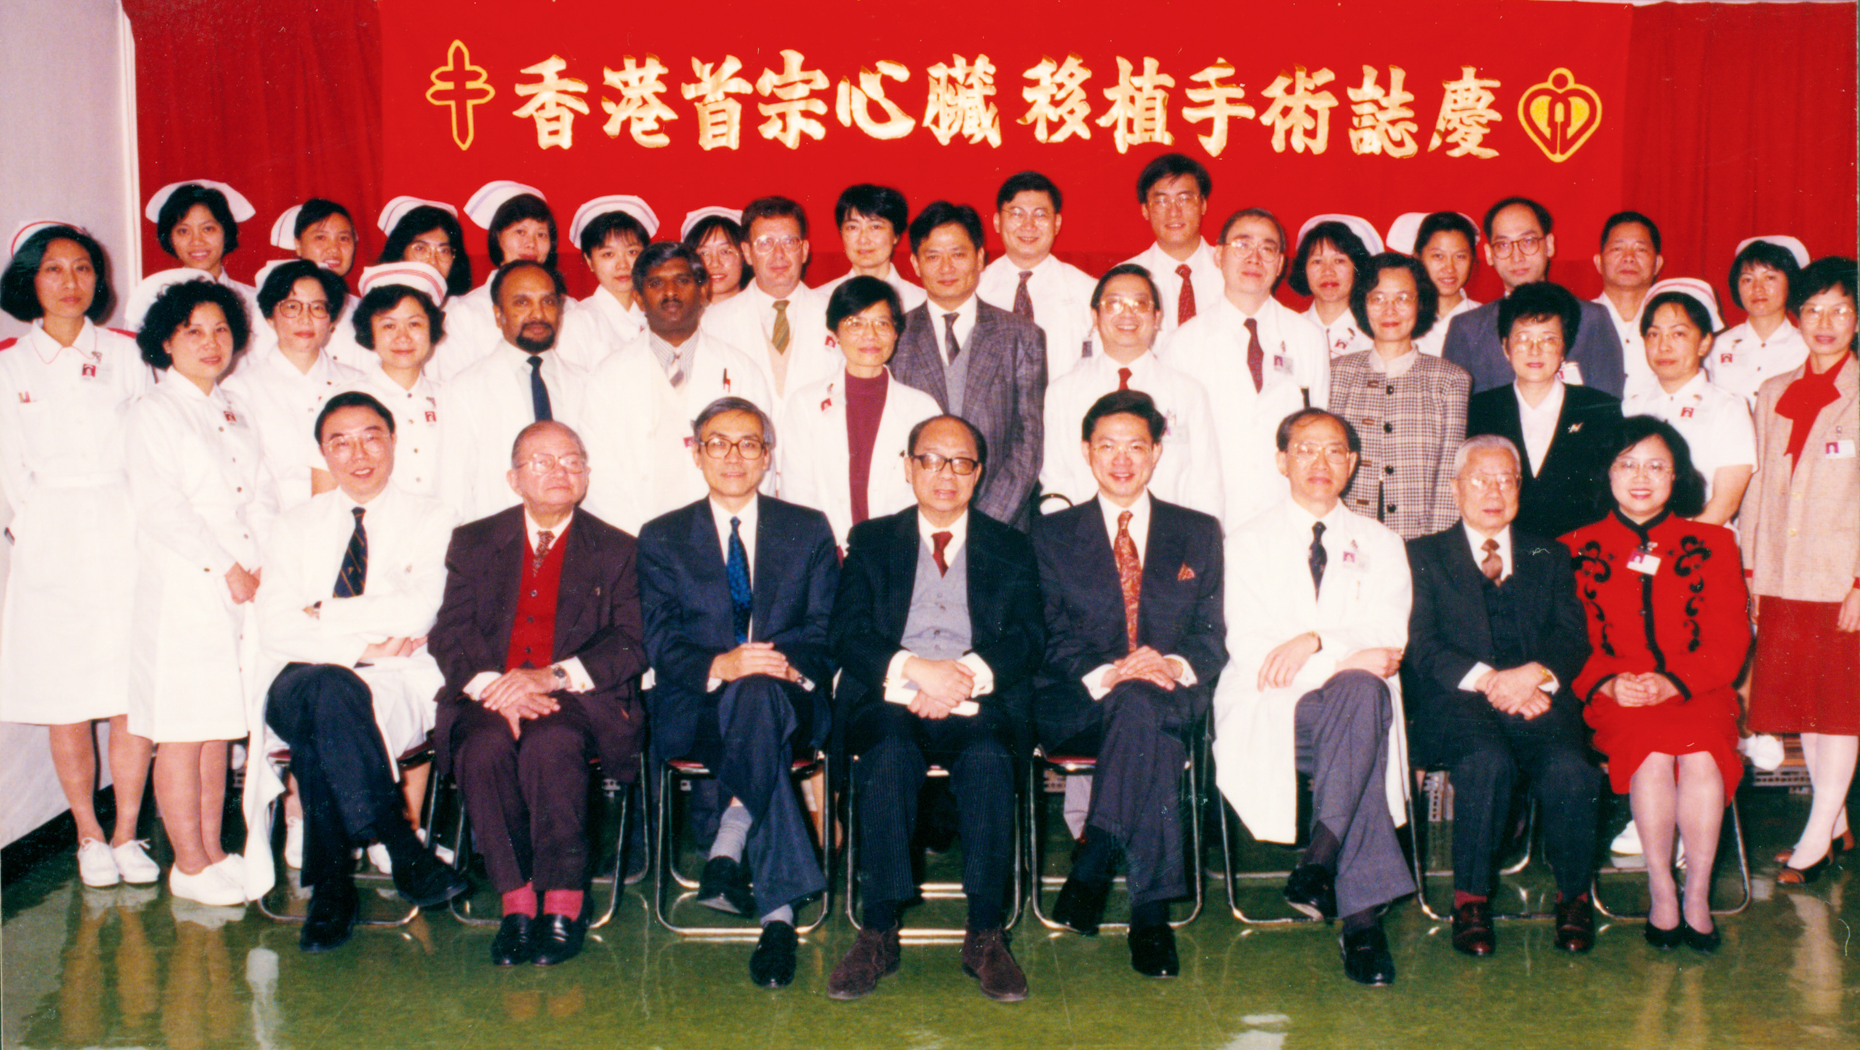 First heart transplant in Hong Kong